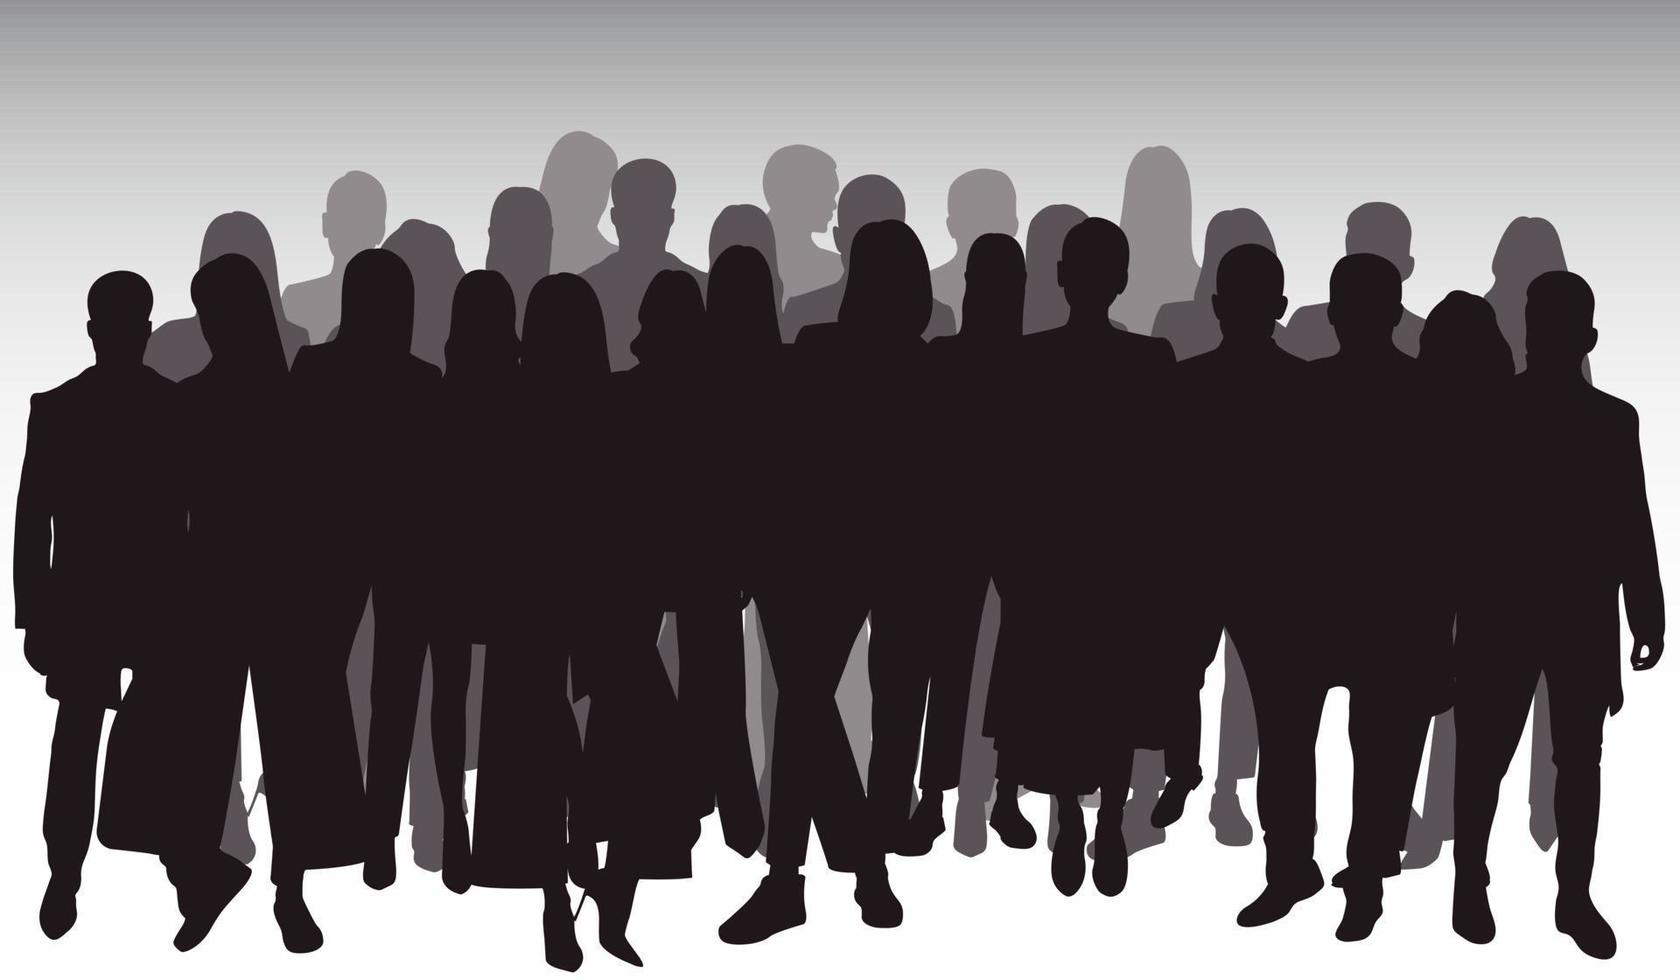 Crowd silhouette outline, group of people. Youth, business group. Isolated vector